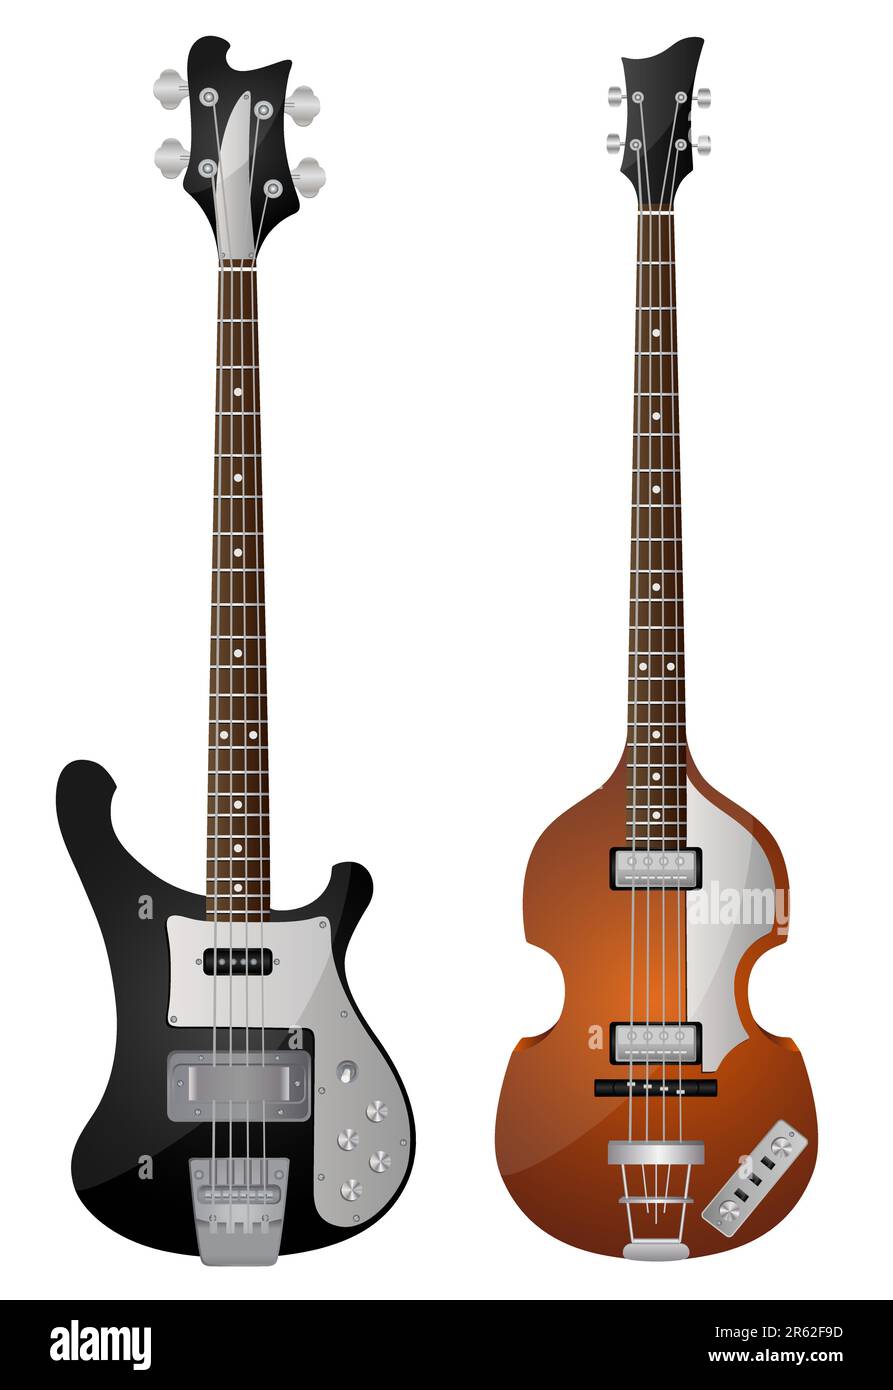 Isolated image of vintage bass guitars. Vector illustration. Stock Vector